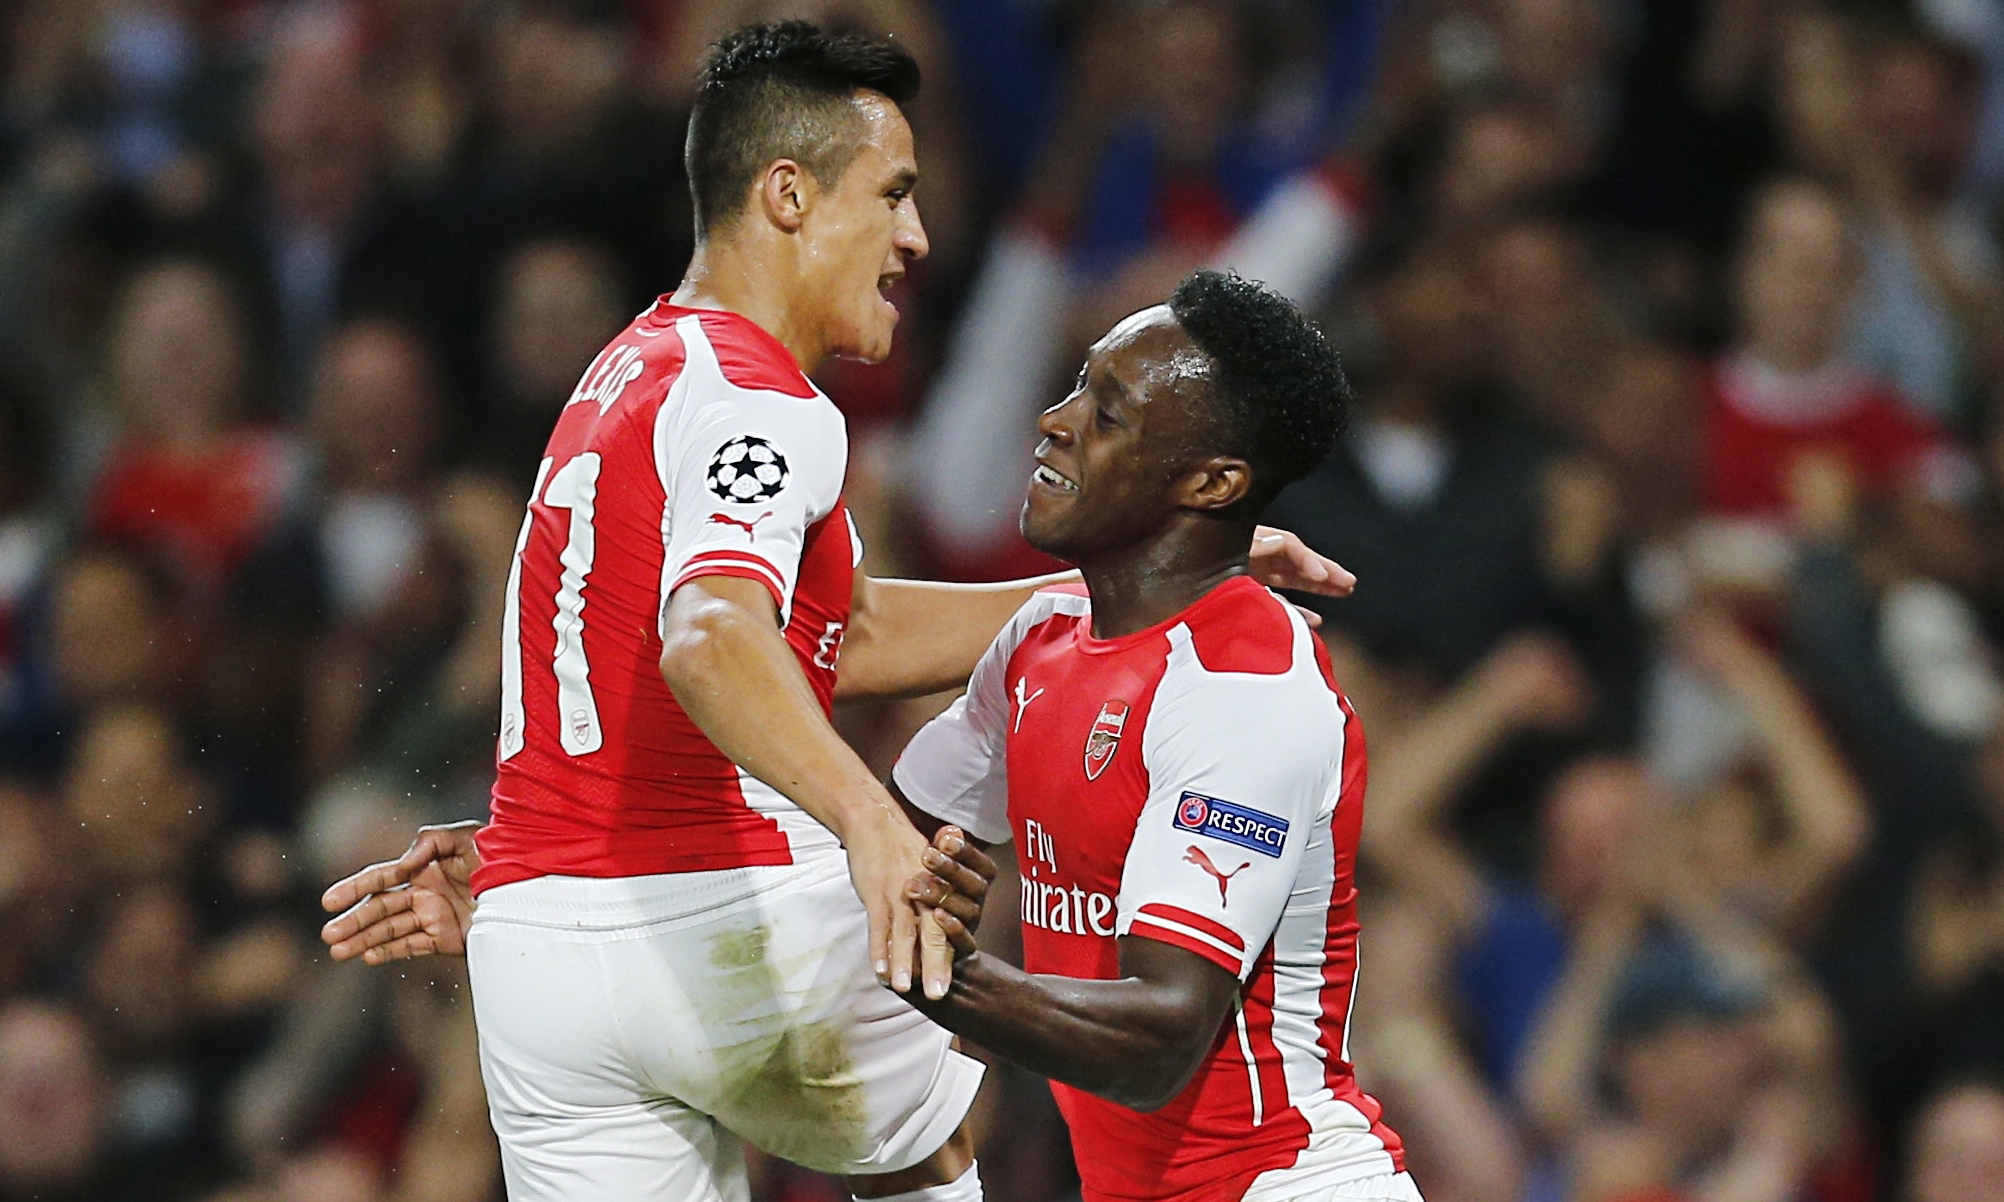 Sanchez and Welbeck continue to flourish upfront for Arsenal